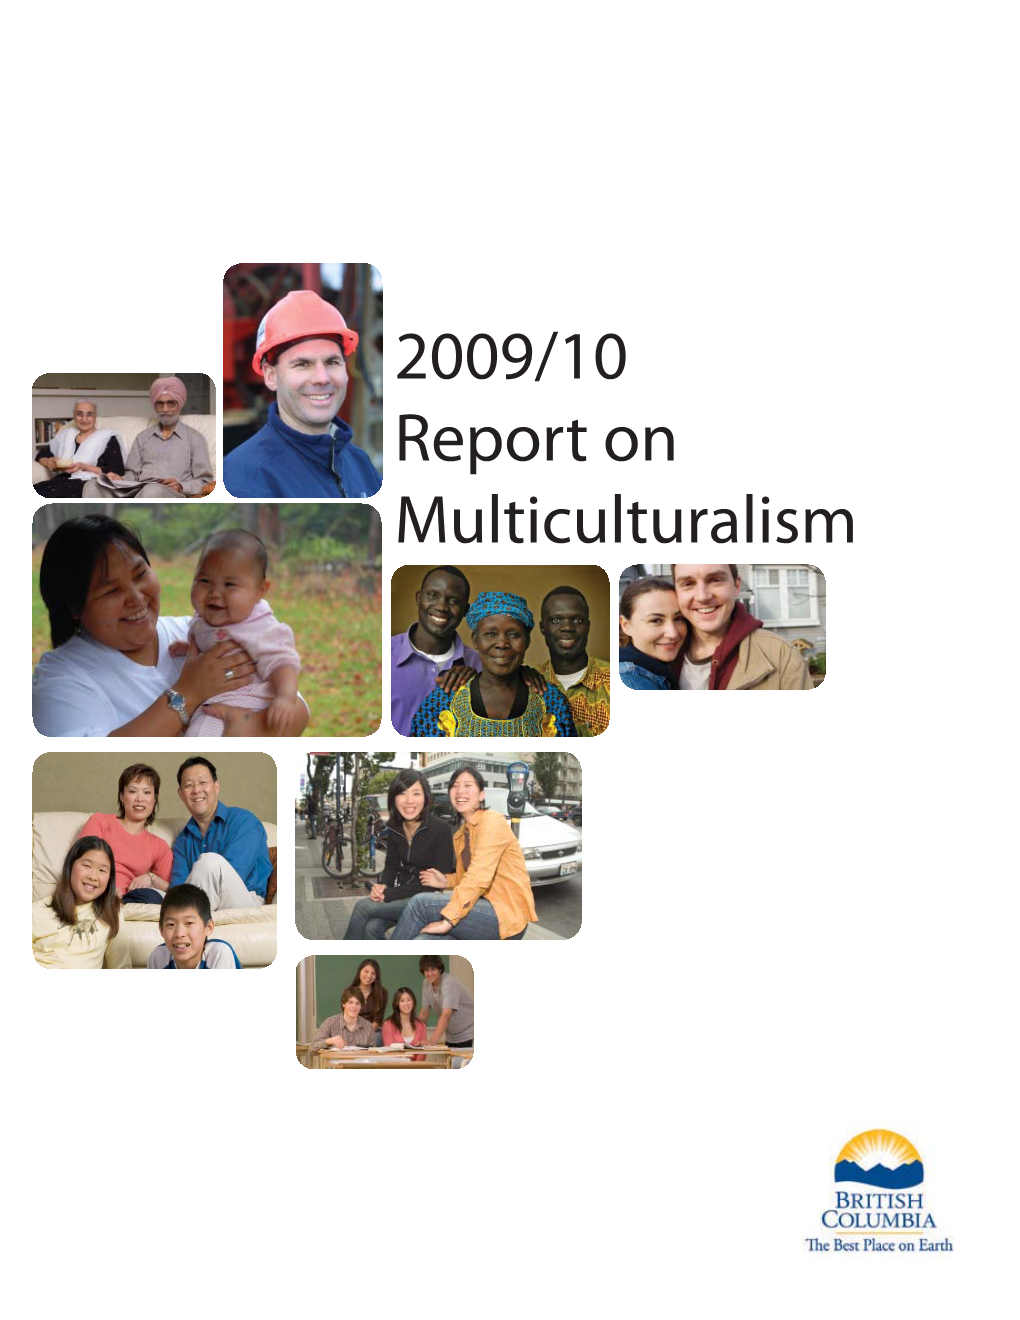 2009/10 Report on Multiculturalism